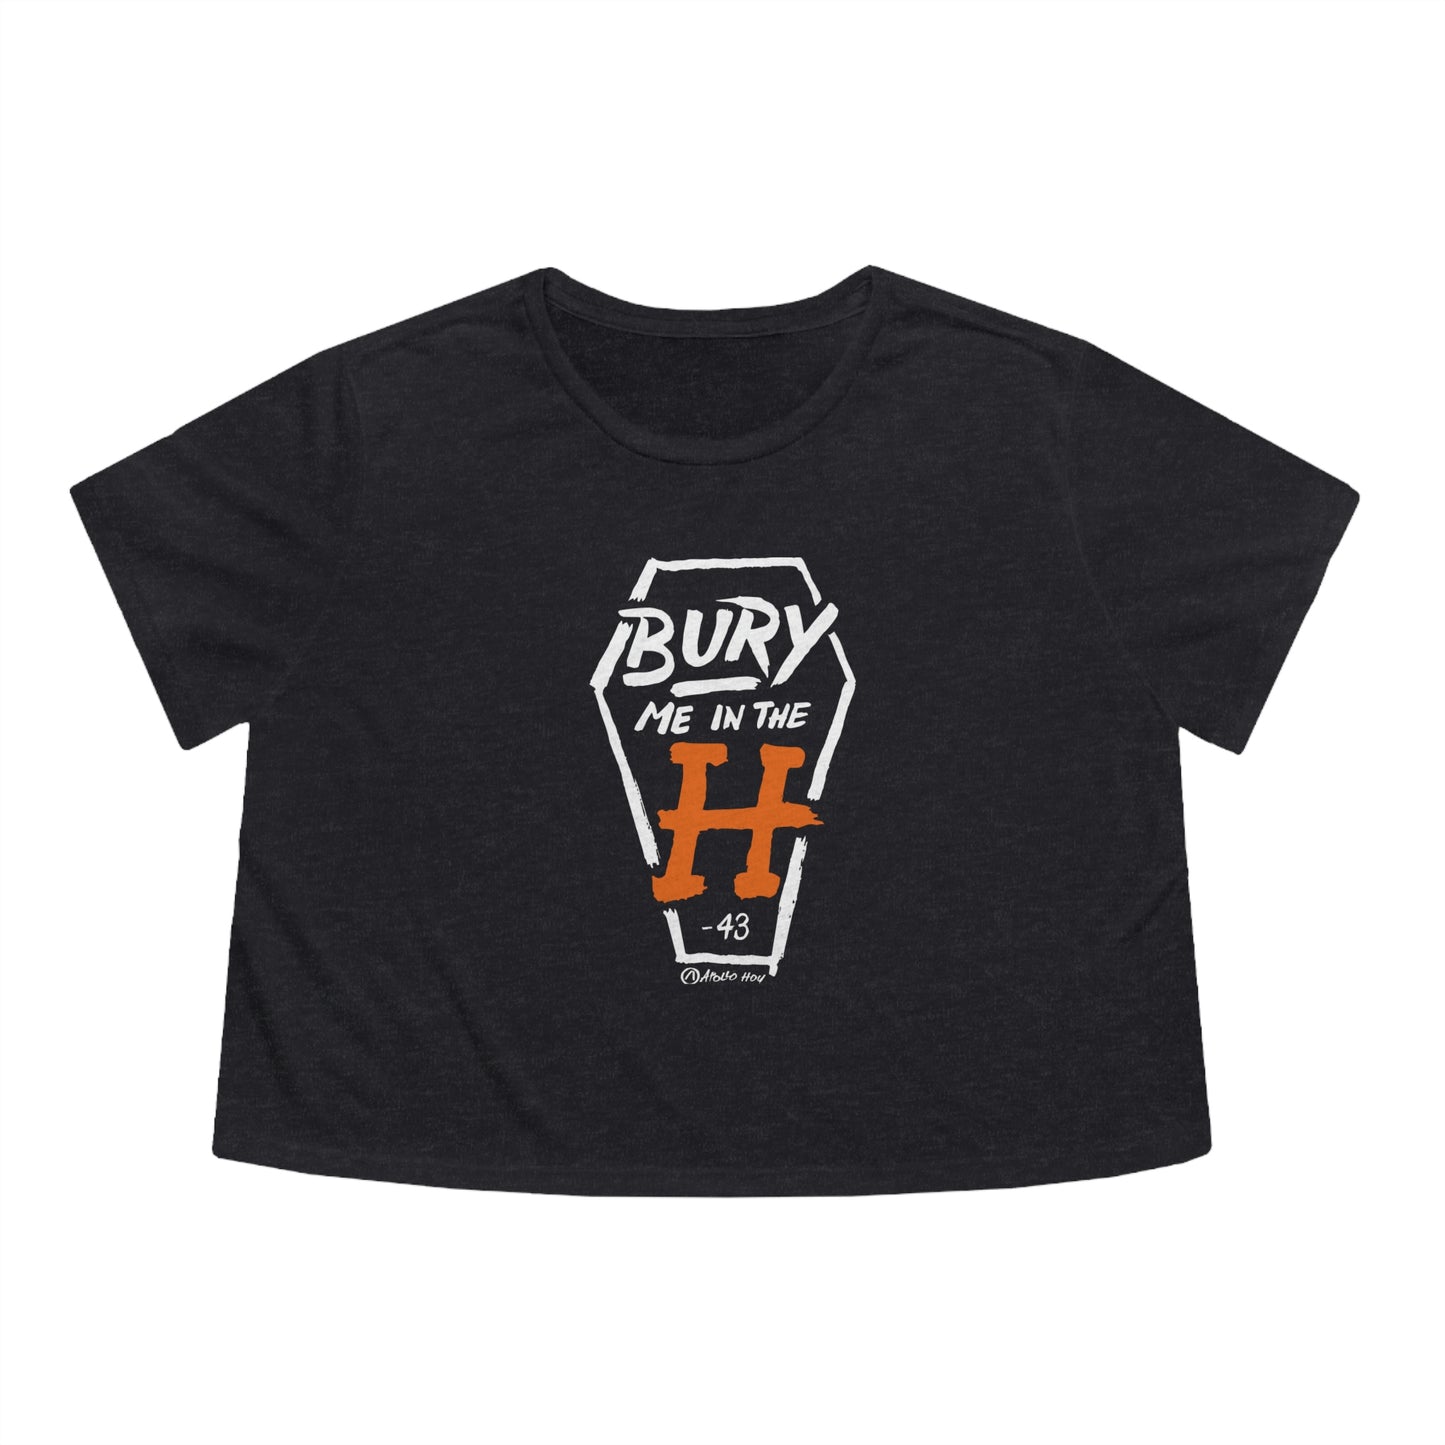 Bury Me In The H (Coffin Variant) Cropped Tee